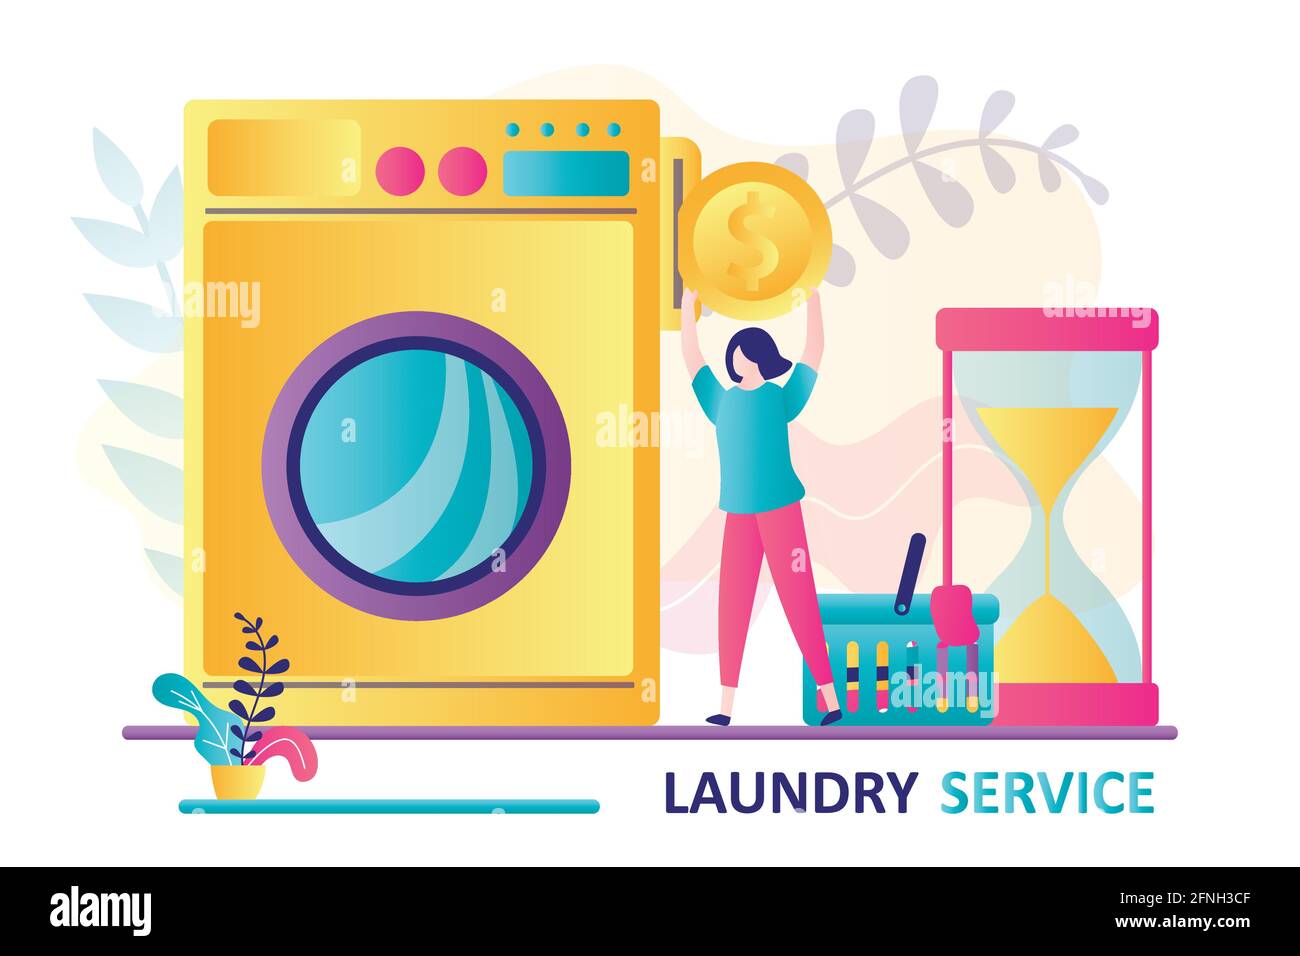 Beautiful woman wash clothes in laundry service. Female character holds big coin for payment. Dirty clothes in laundry basket. Large washing machine, Stock Vector